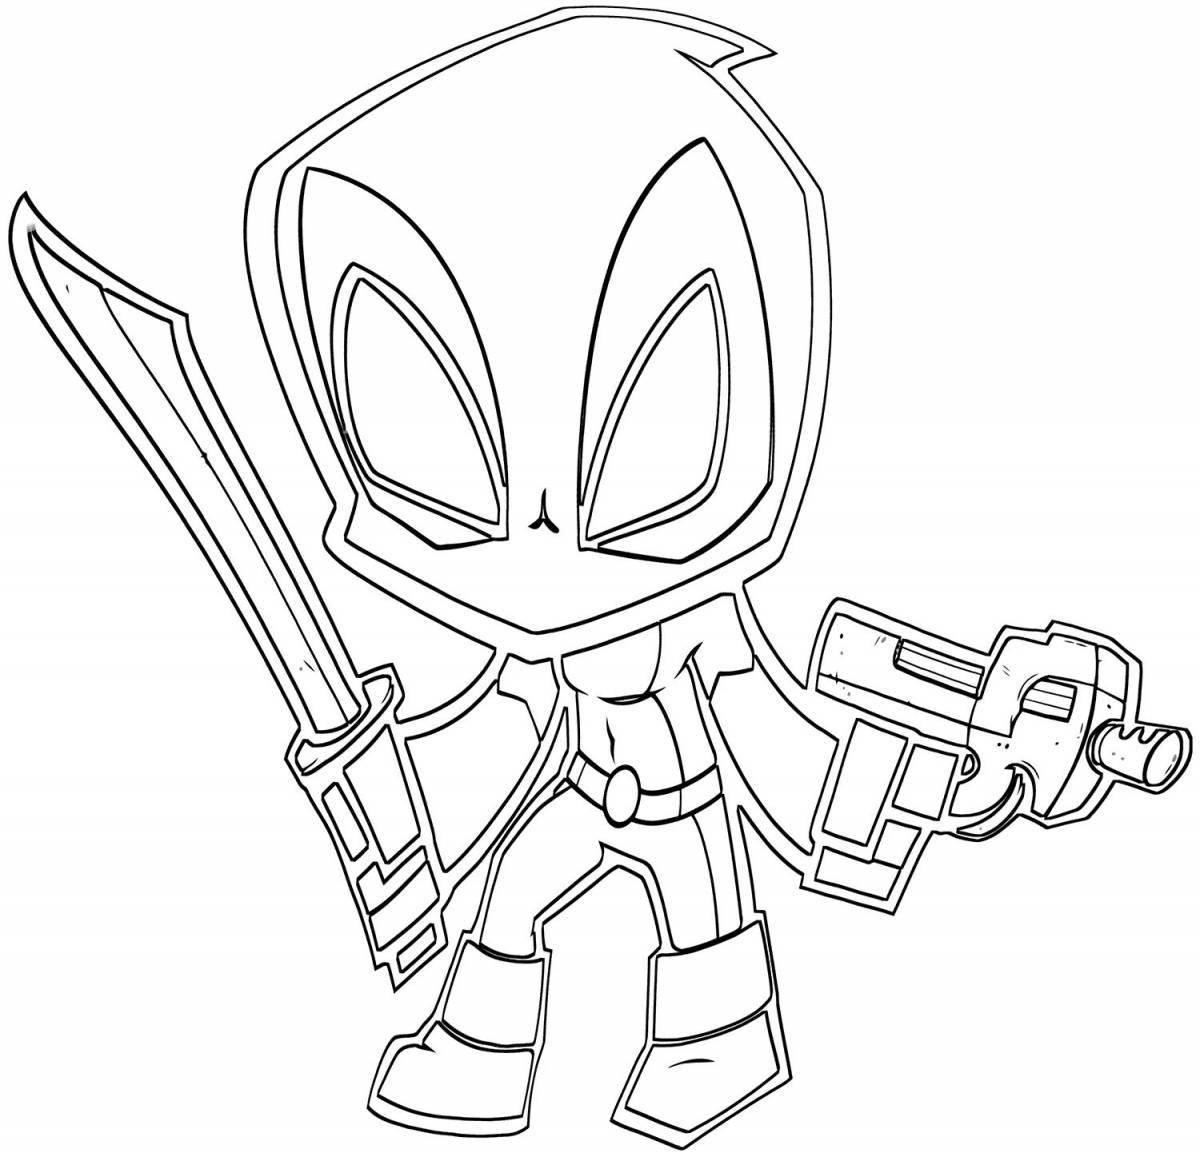 Animated deadpool coloring page